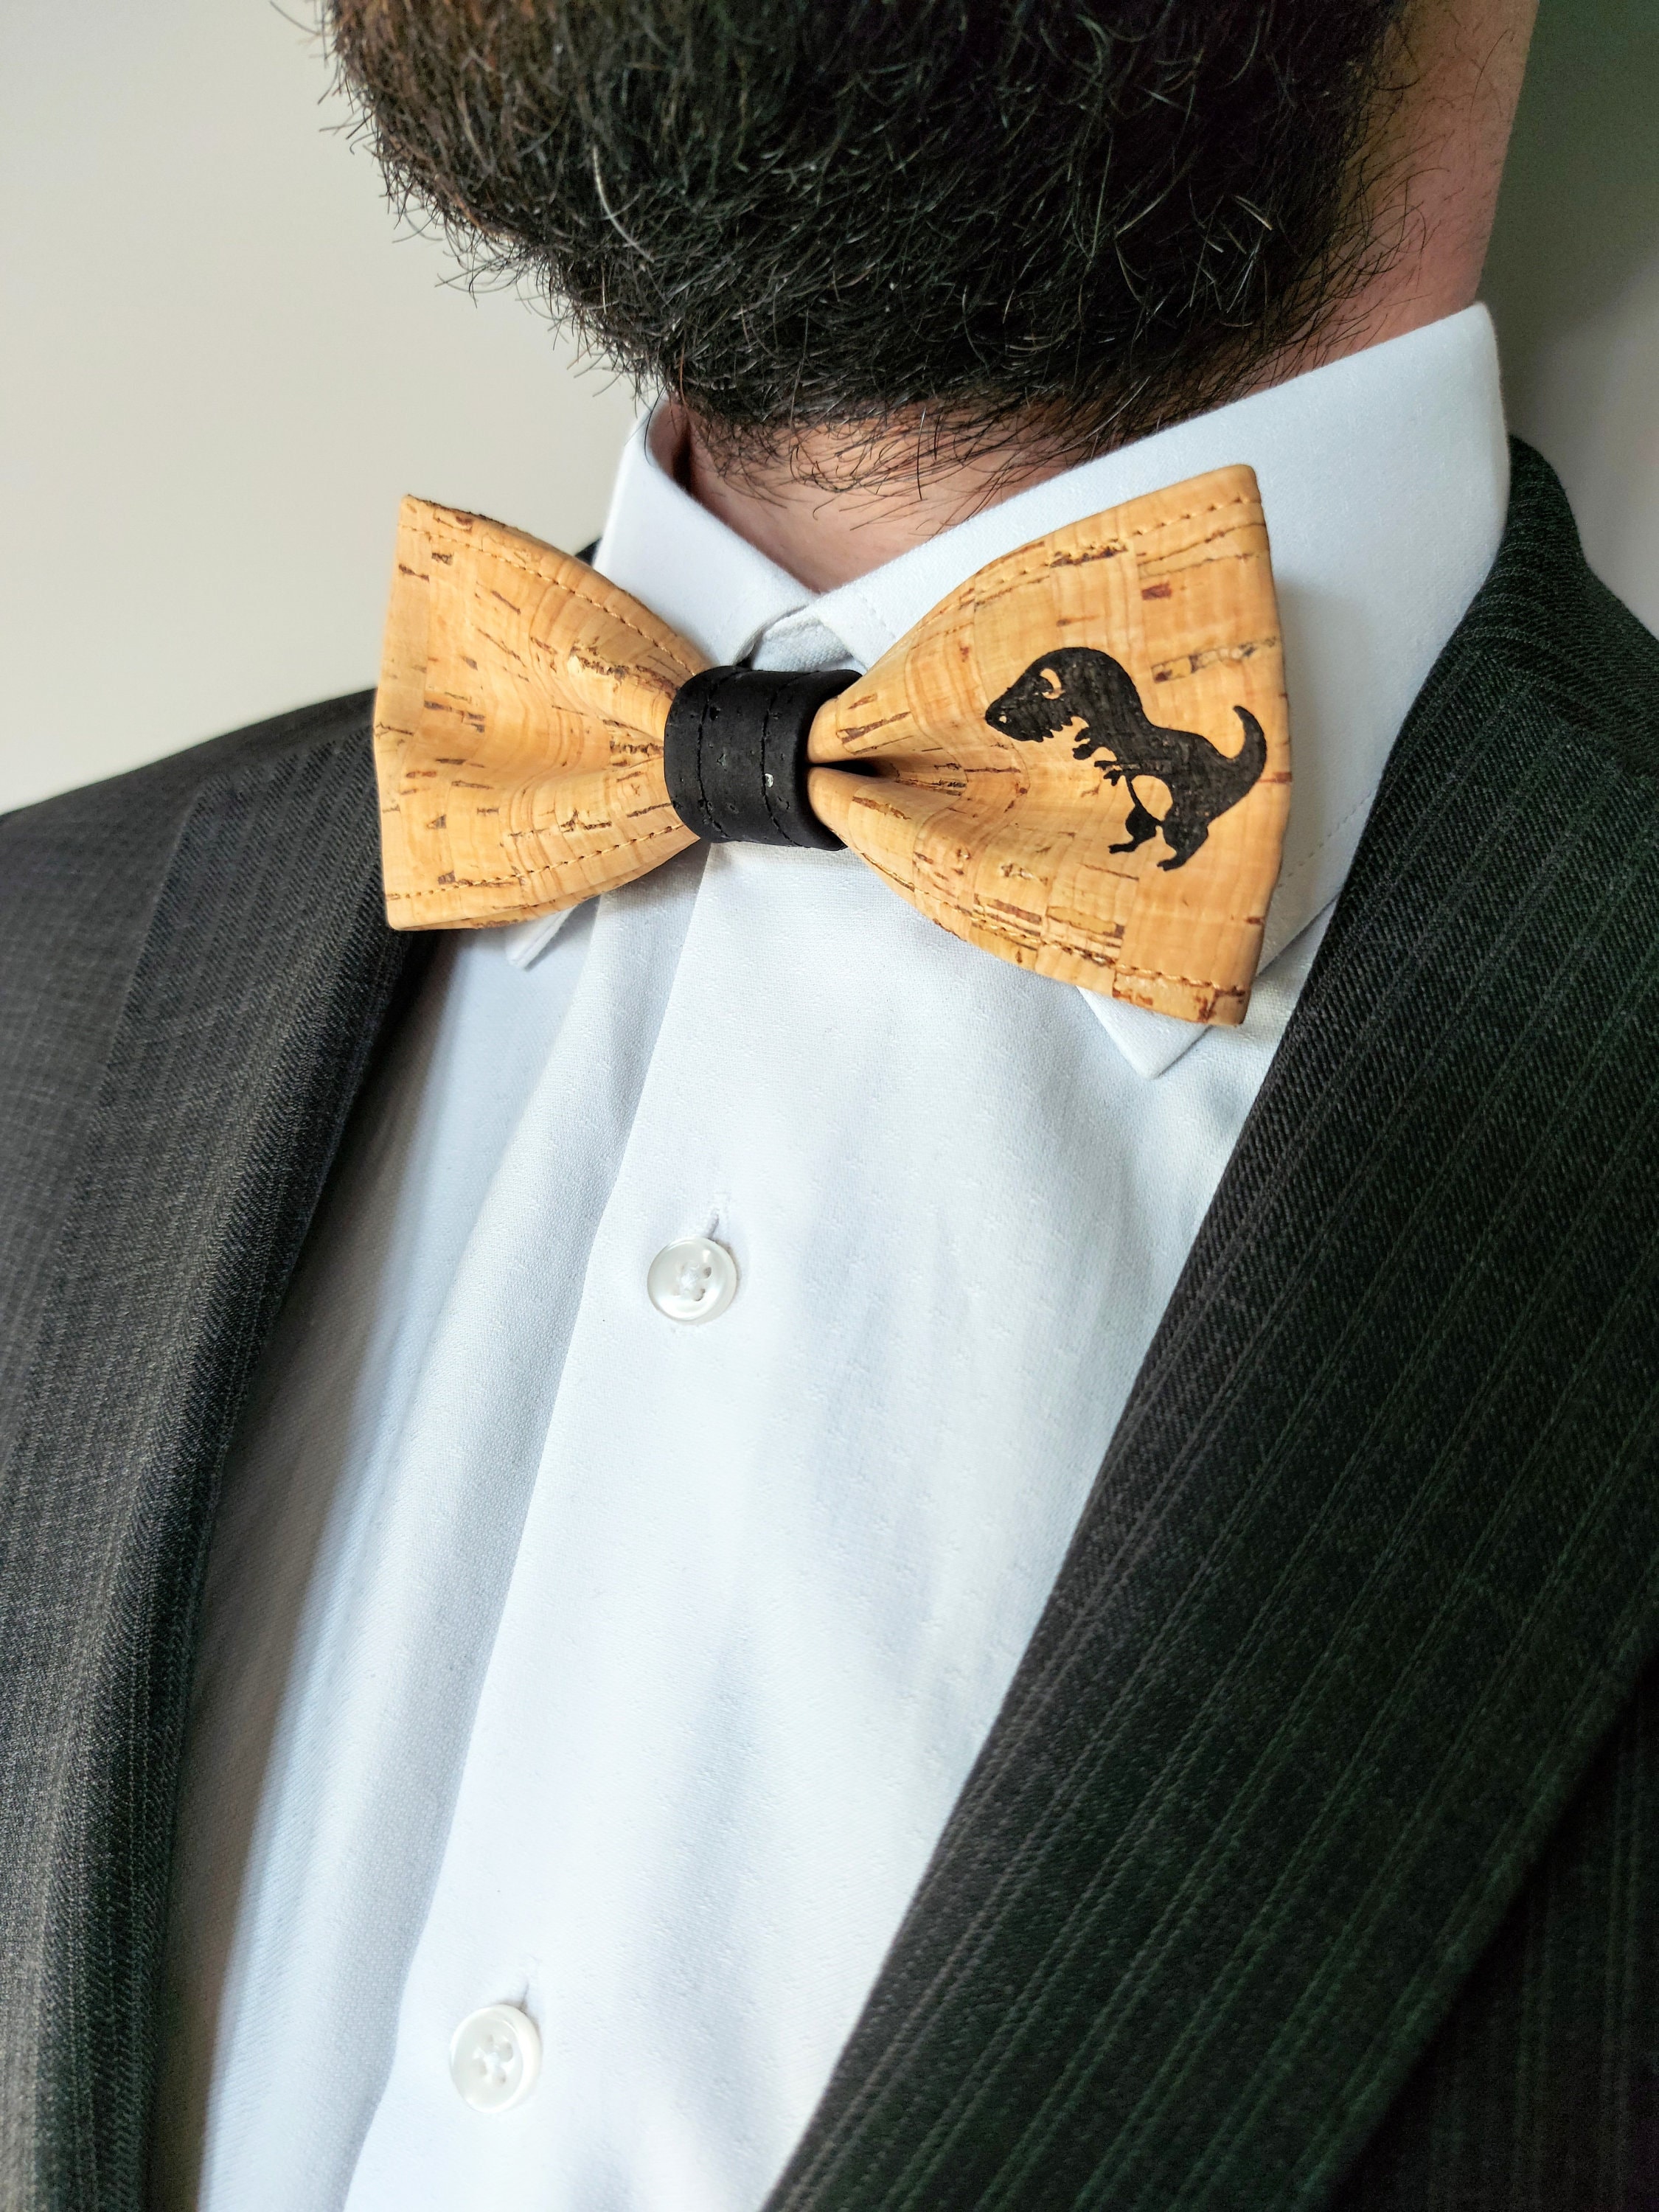 Mens fashion Novelty Bow tie English Bulldog Humor Pre-tied Bowtie for wedding dinner party 